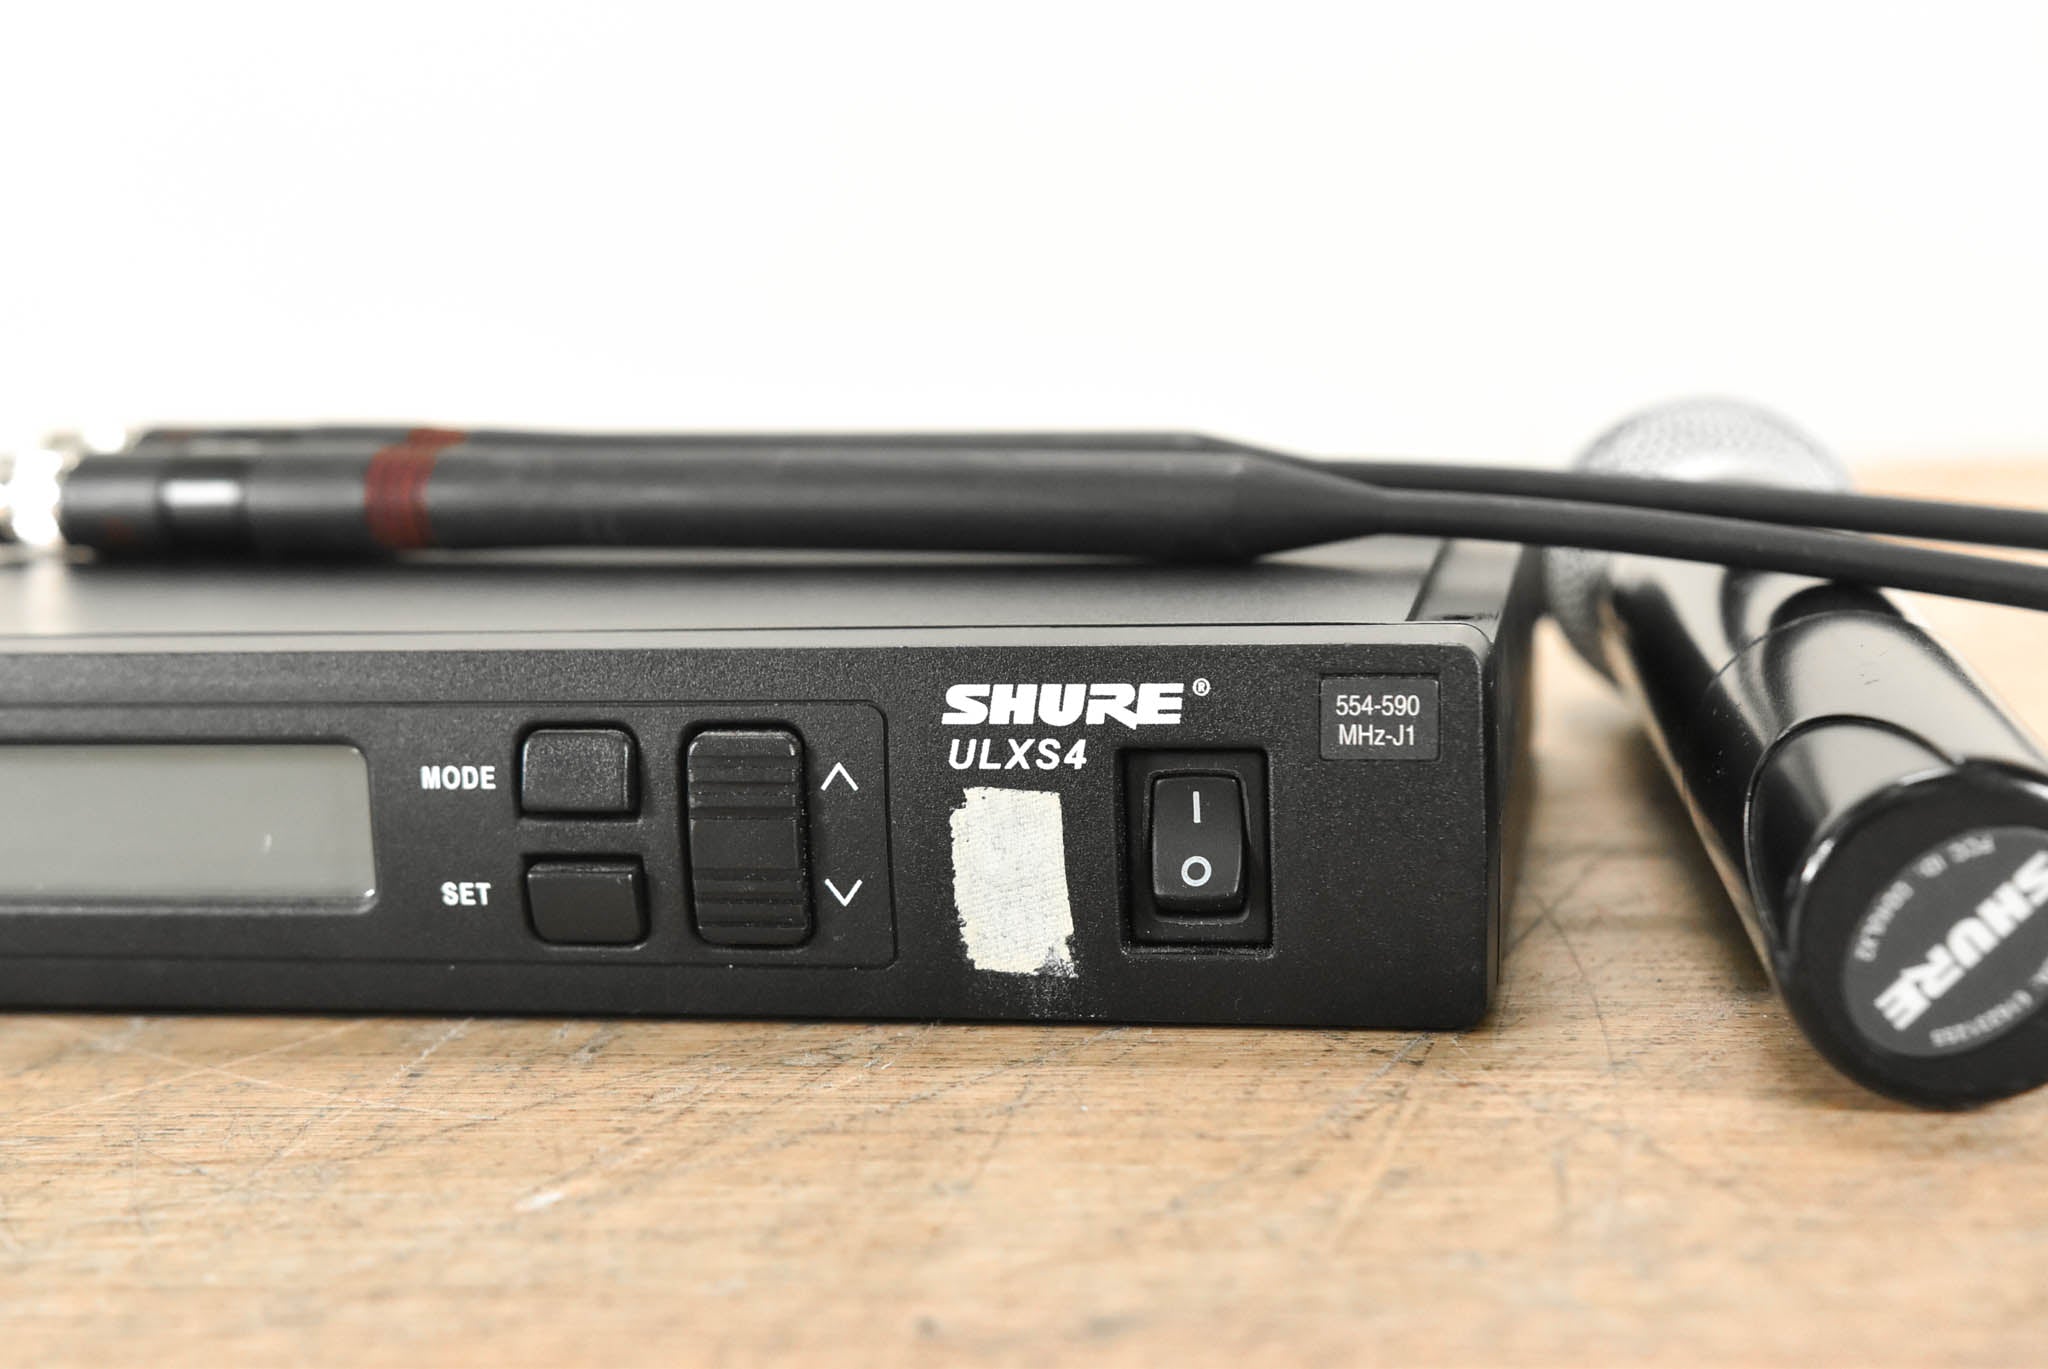 Shure ULXS24/BETA87A-J1 Handheld Wireless Microphone System 554-590 MHz